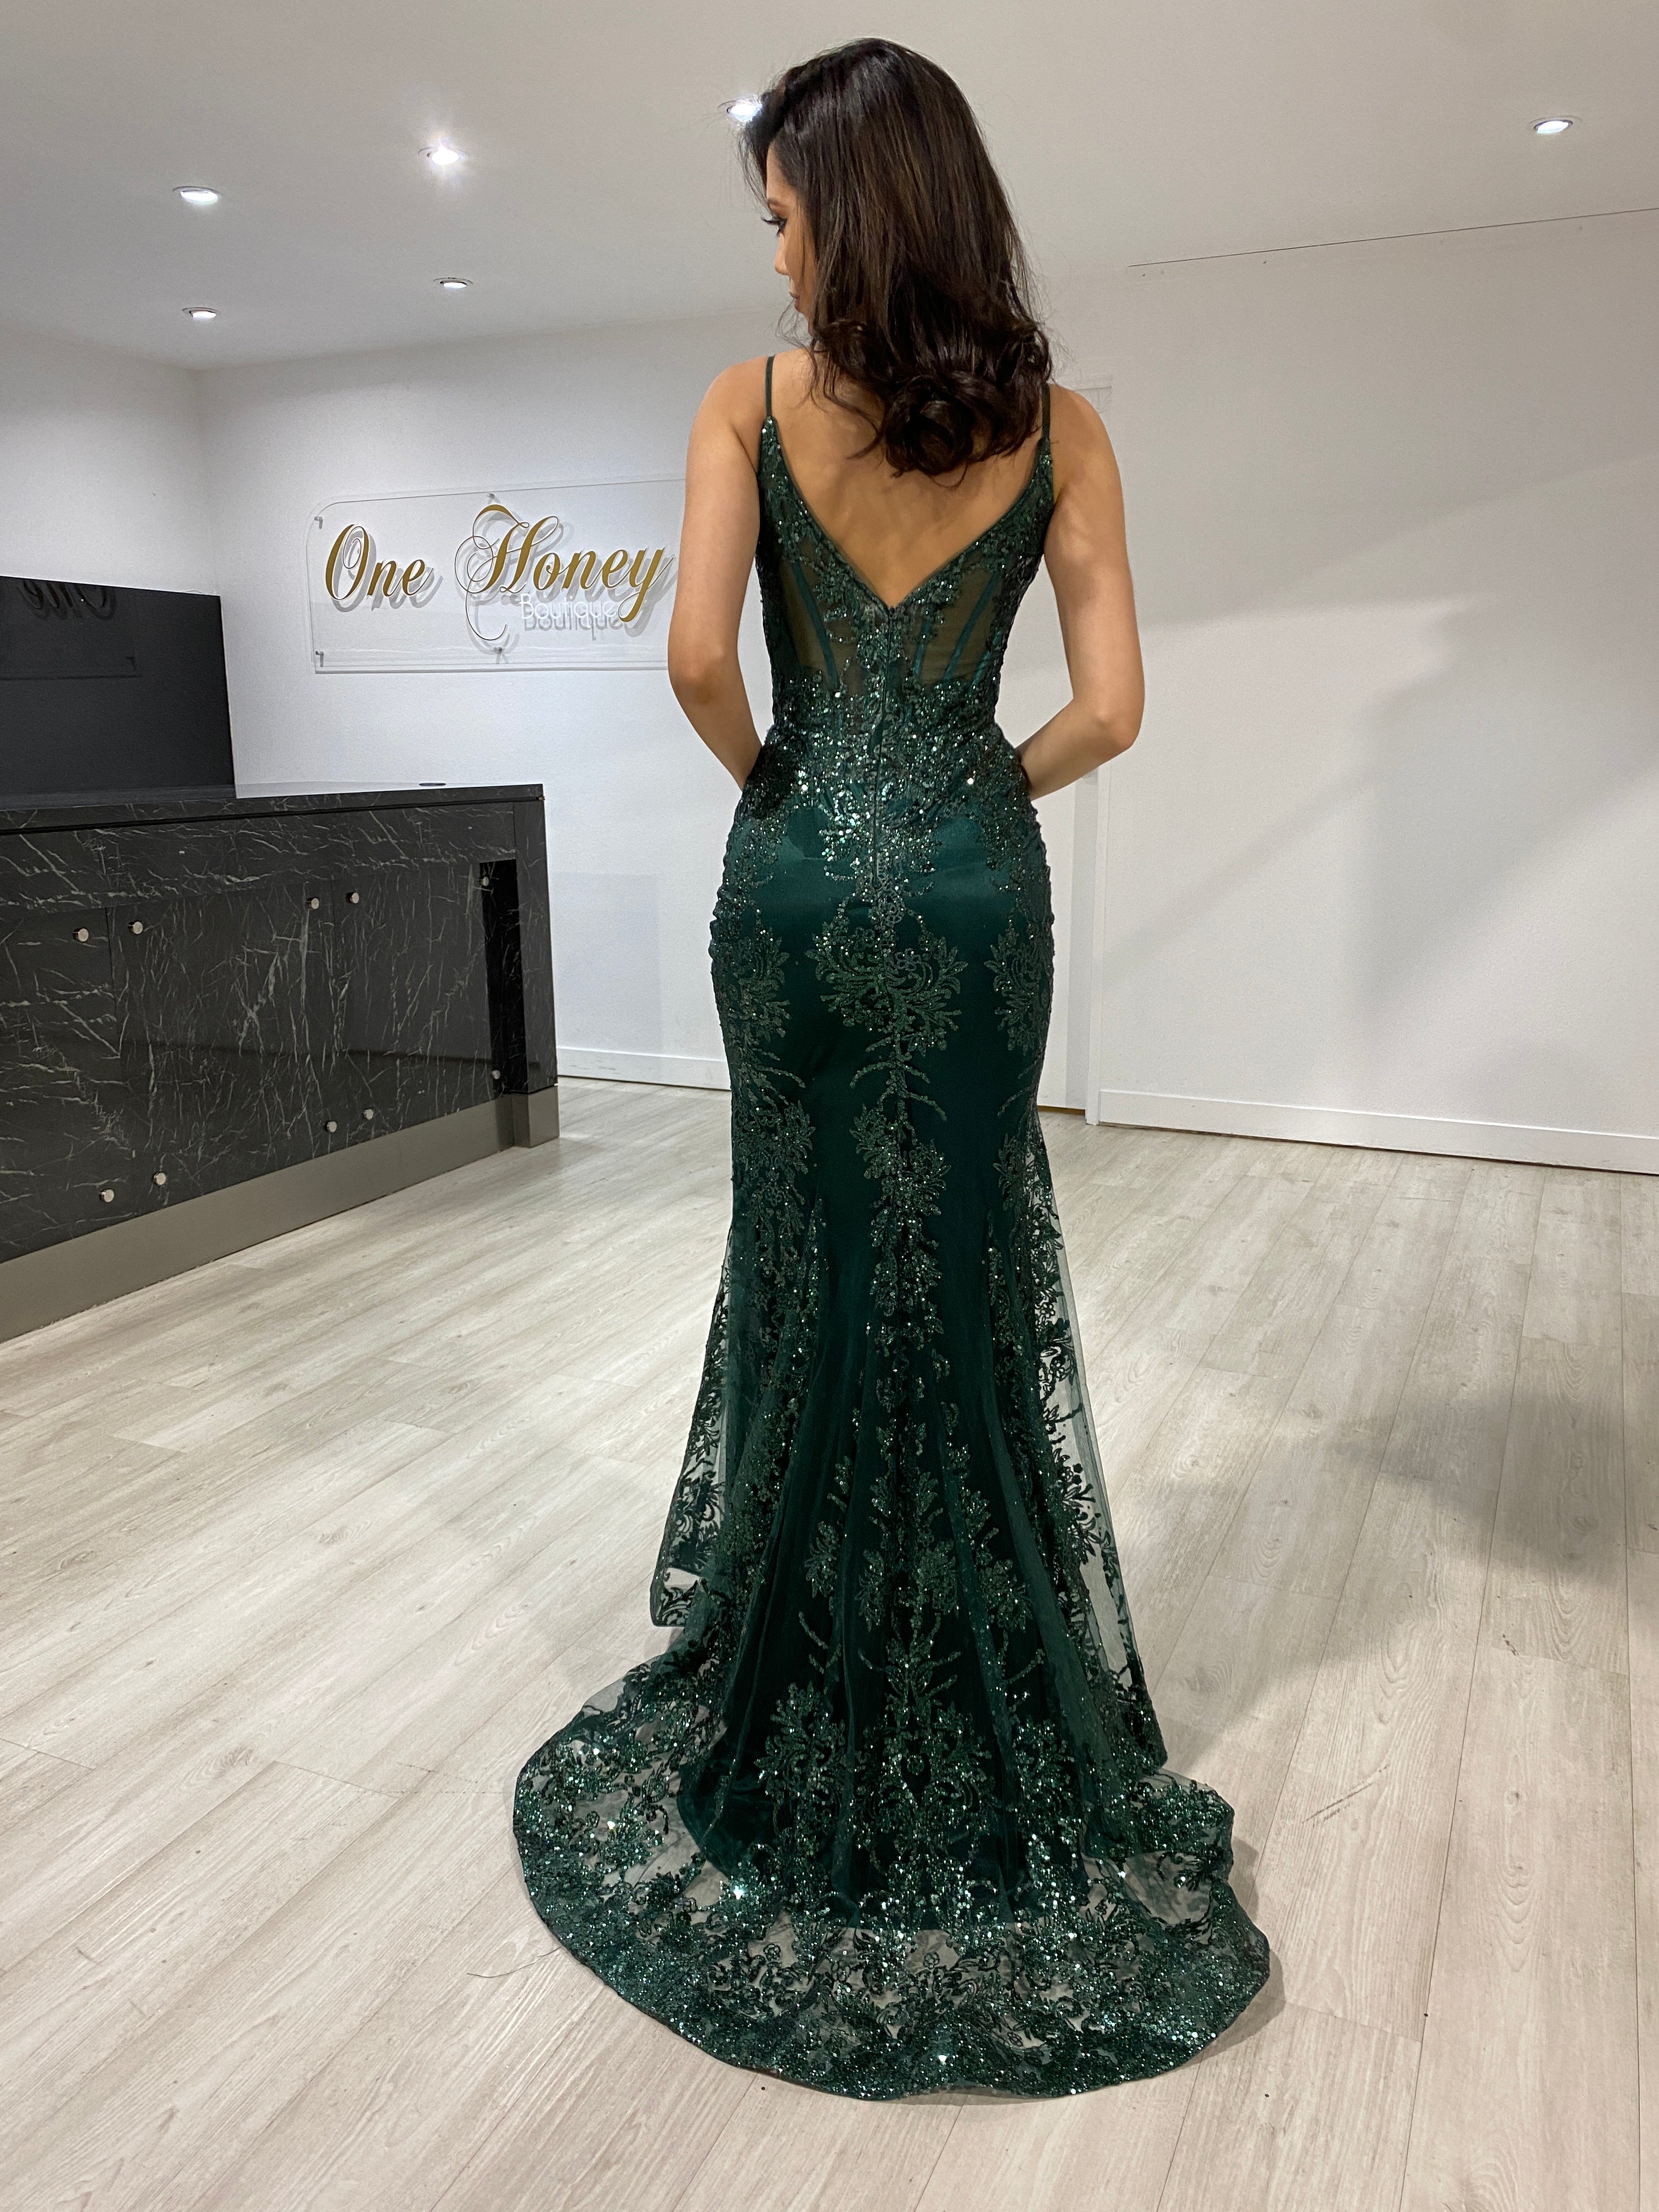 Emerald Sequin Forest Green Prom Dress With Detachable Train One Shoulder Evening  Gown For Formal Occasions And Birthdays From Bridalstore, $122.84 |  DHgate.Com